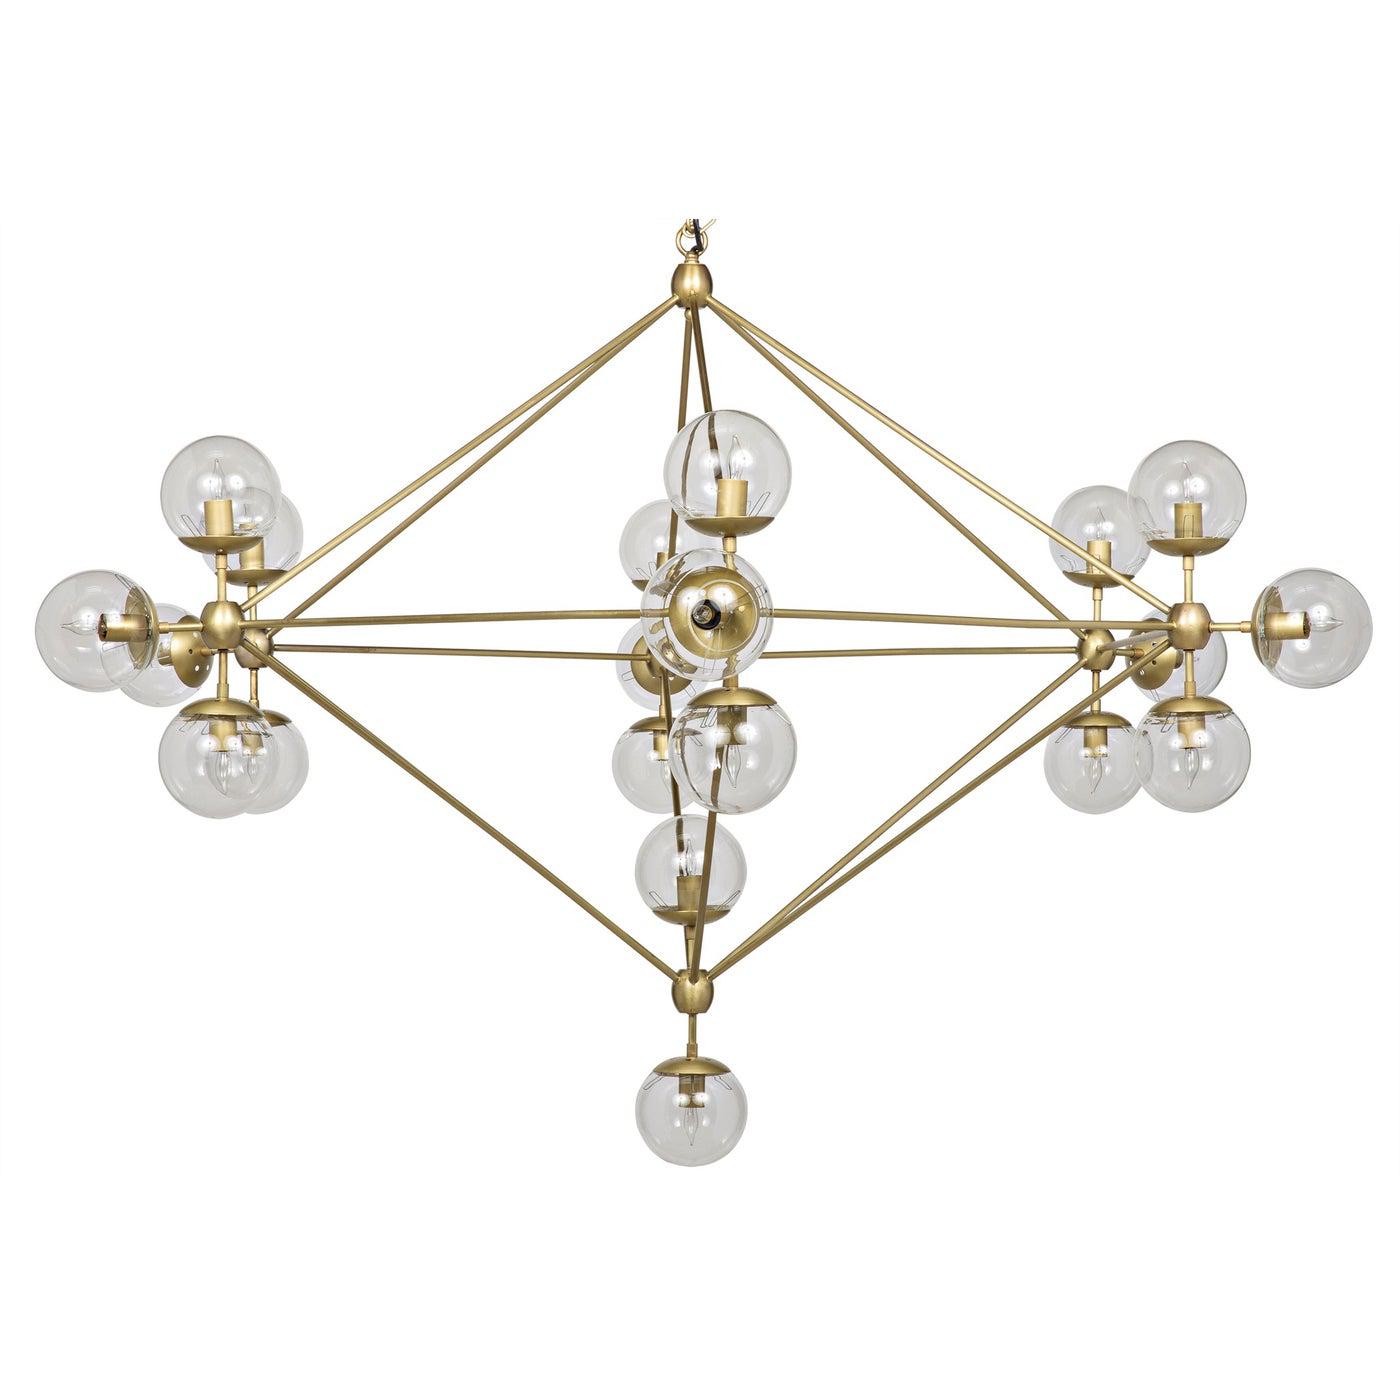 Pluto Chandelier, Large, Metal with Brass Finish and Glass